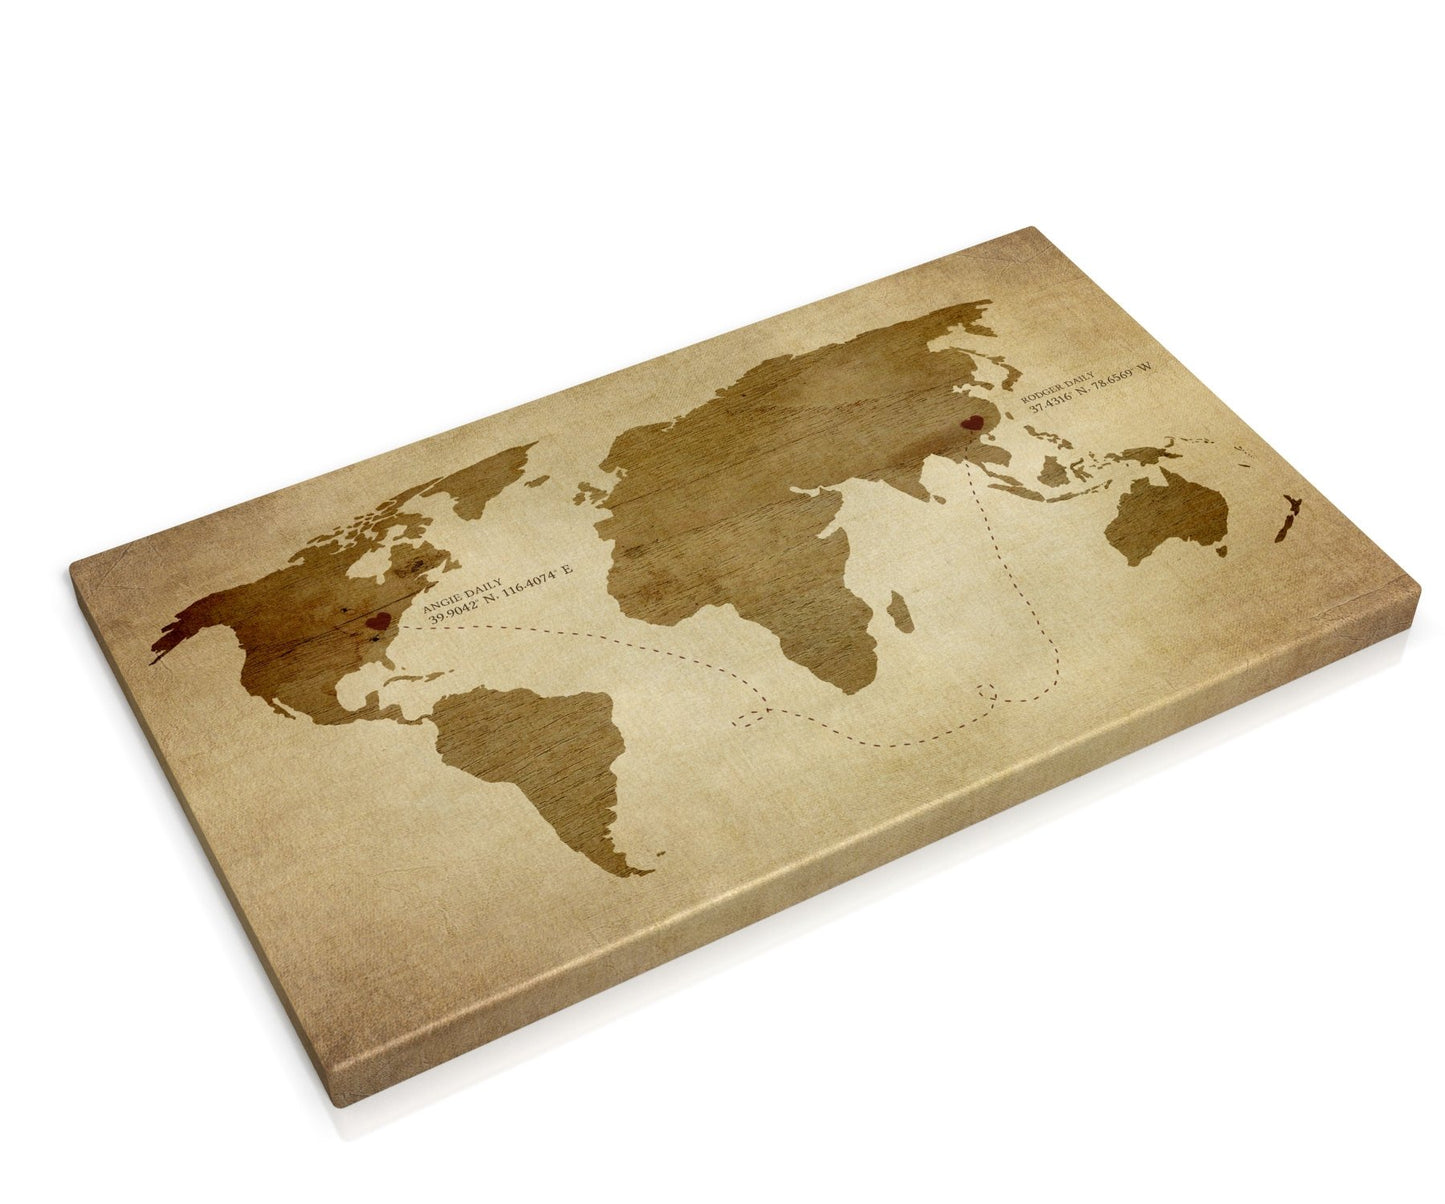 Military Family Push Pin World Map, Long Distance Love Map